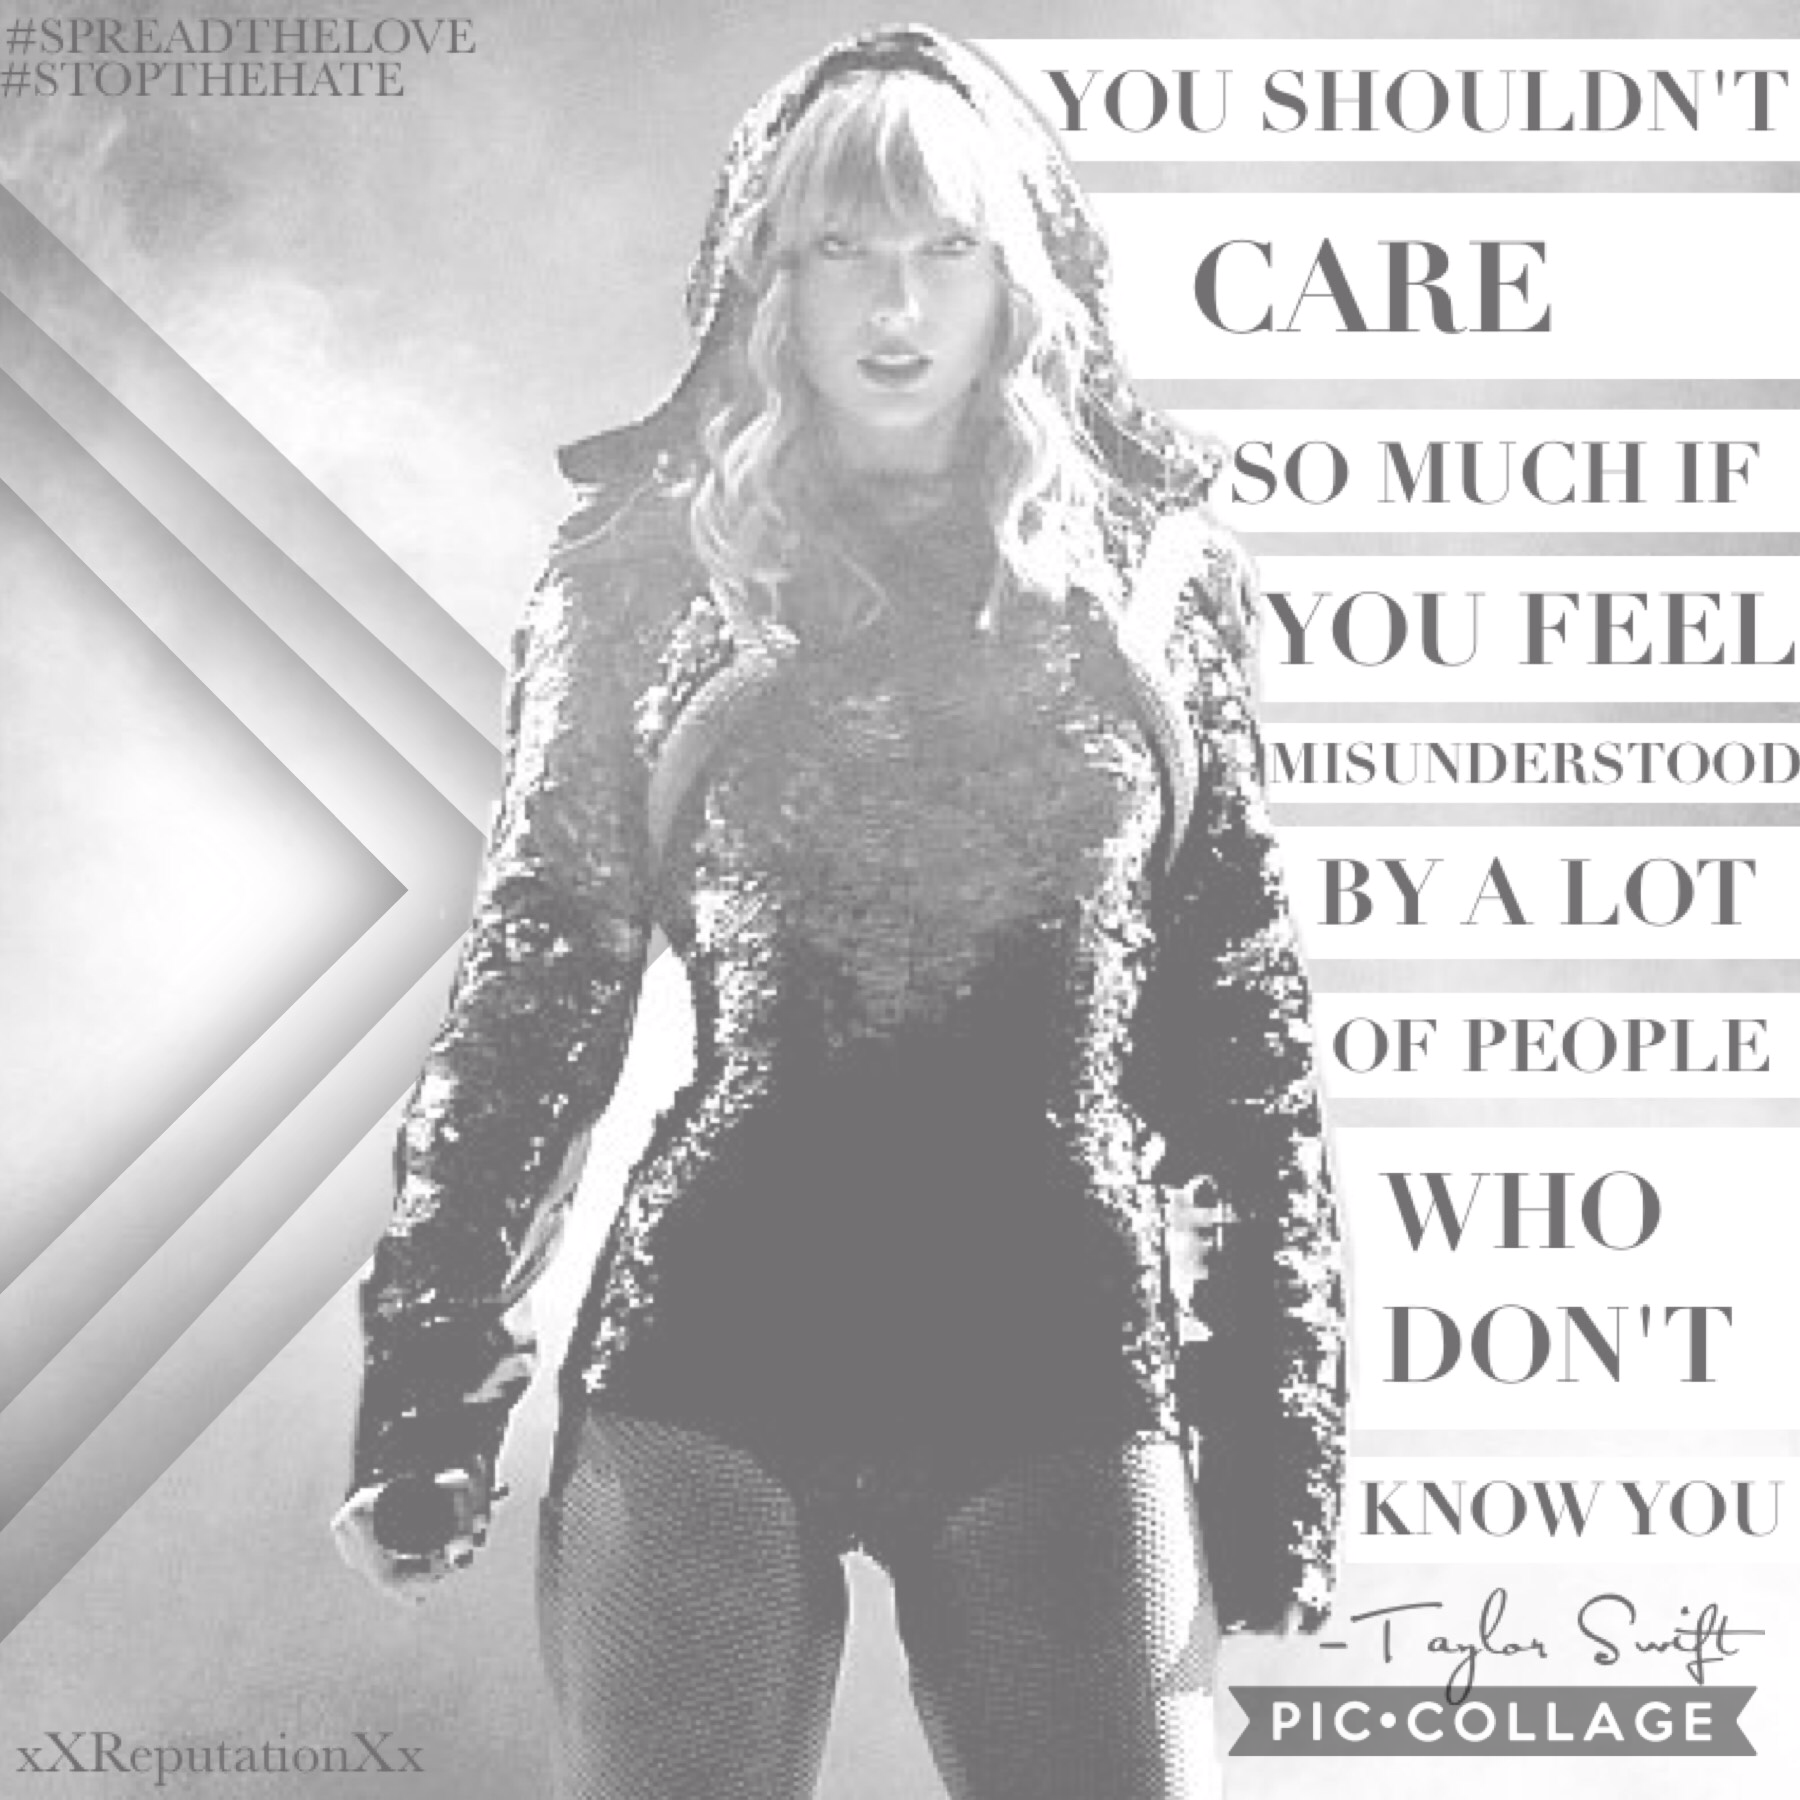 Made this for EverythingSwift's Mega Collab. I also love this quote.
QOTD: What is your favorite month?
AOTD: December cuz Christmas and Snow. Duh.